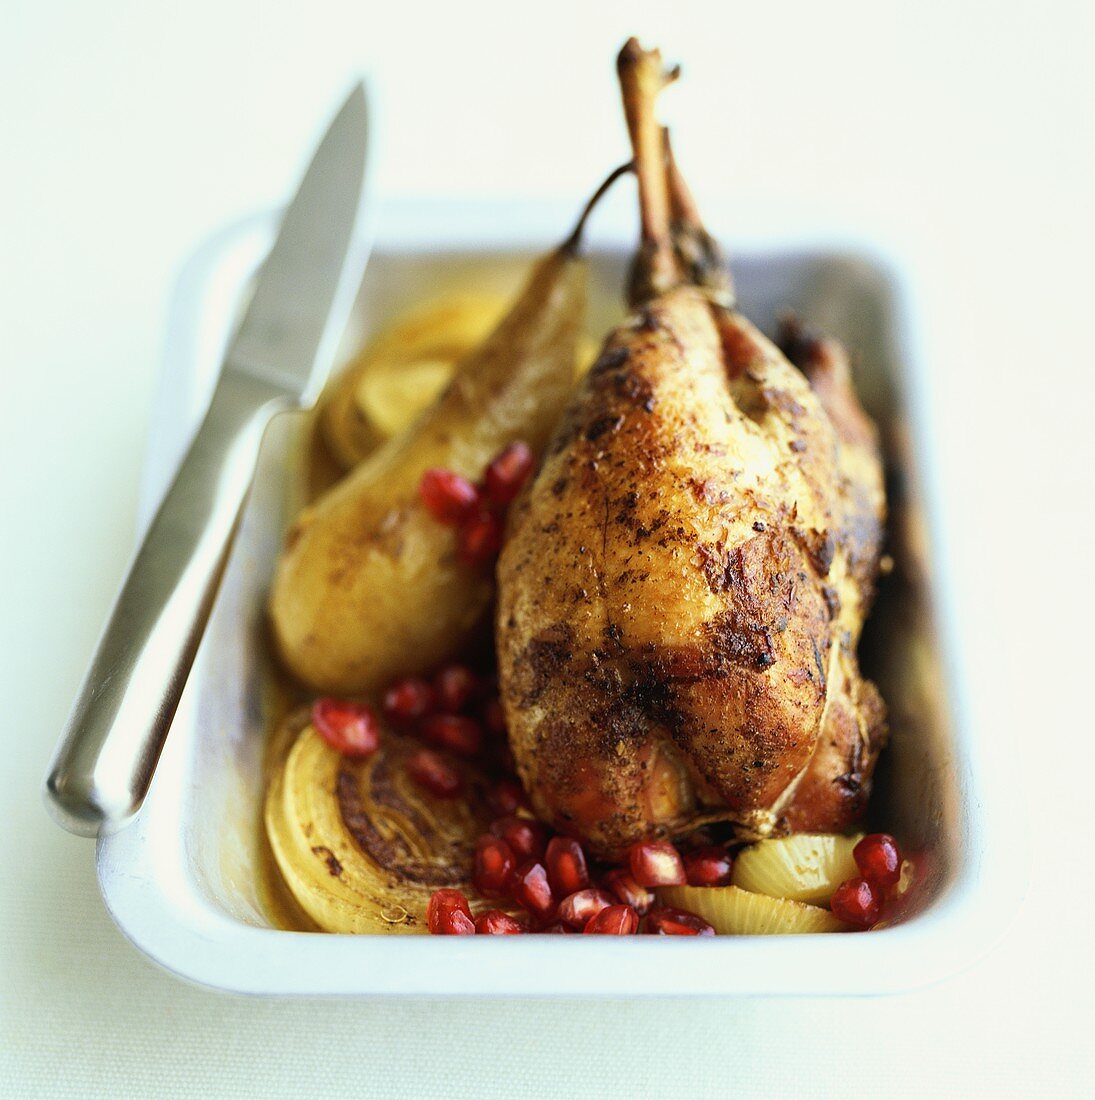 Roast partridge with pears and pomegranate seeds